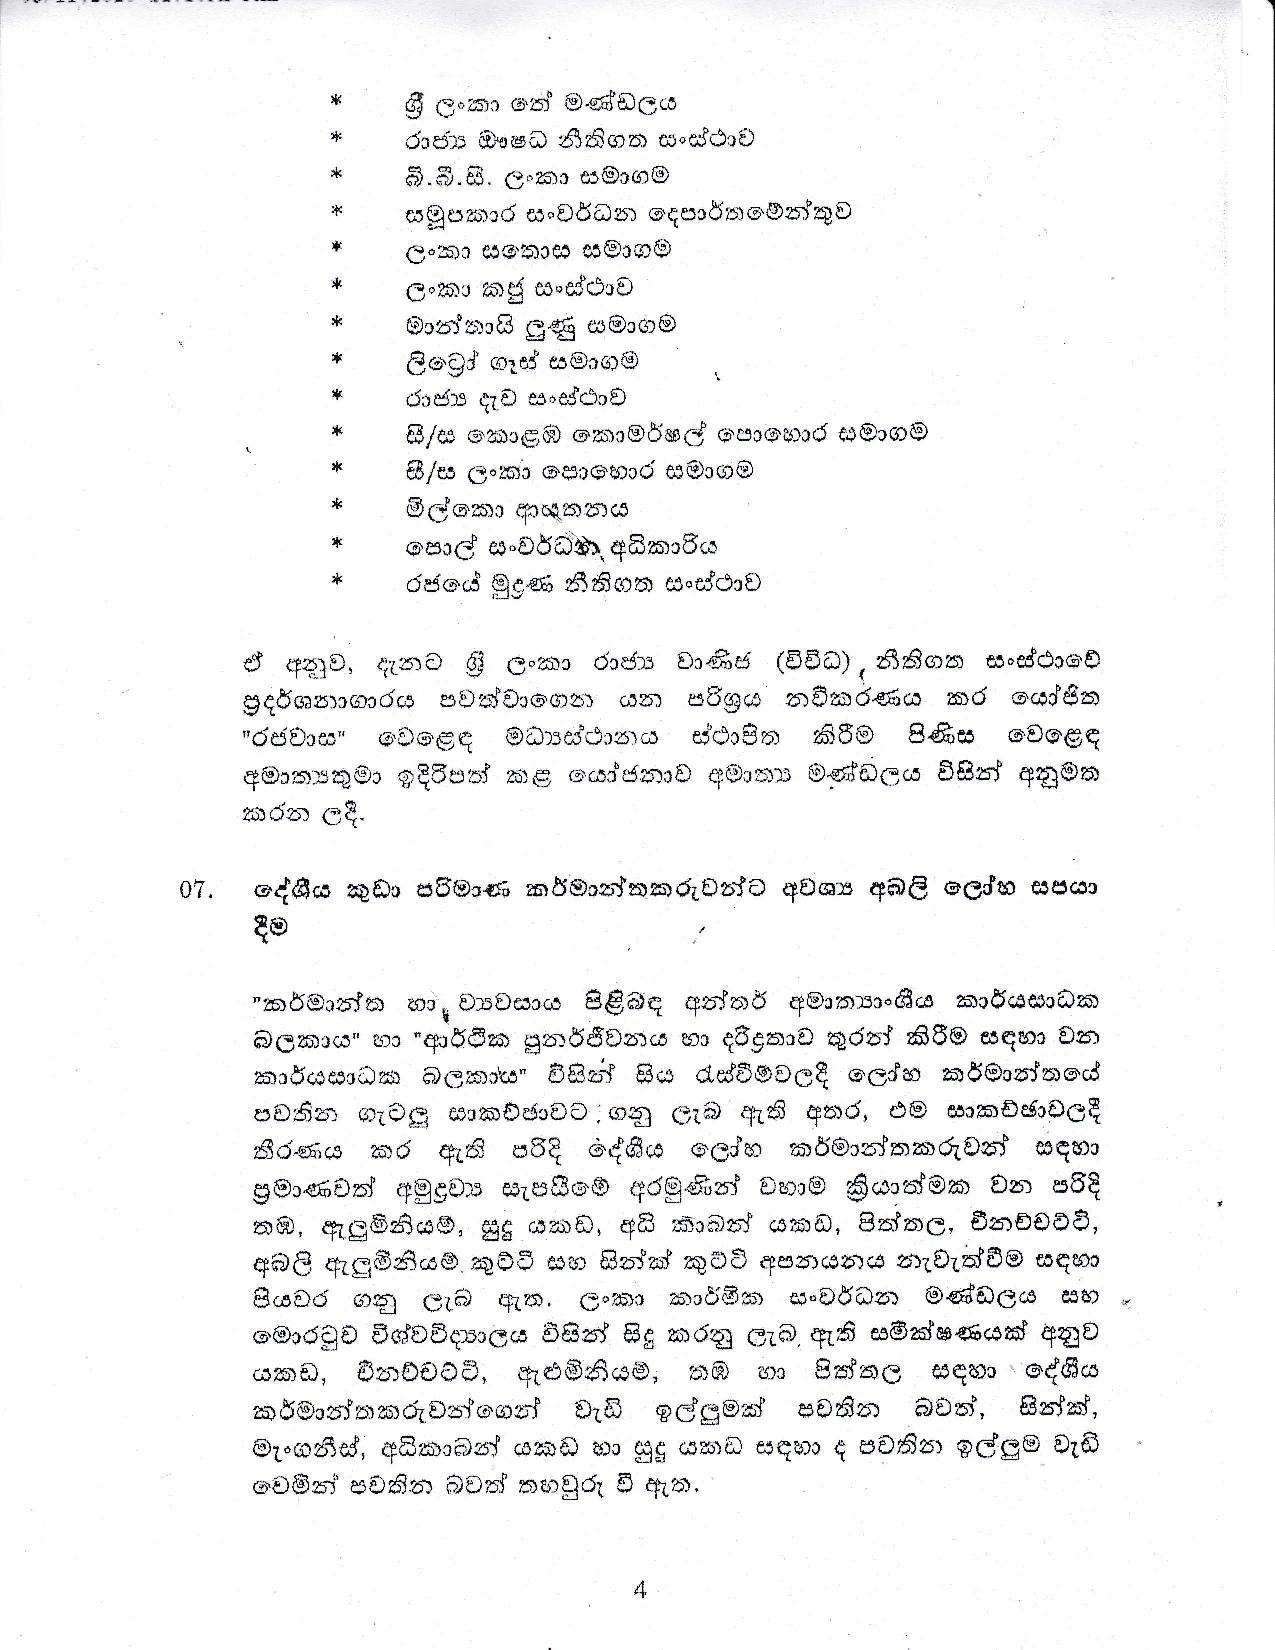 Cabinet Decision on 09.11.2020 page 004